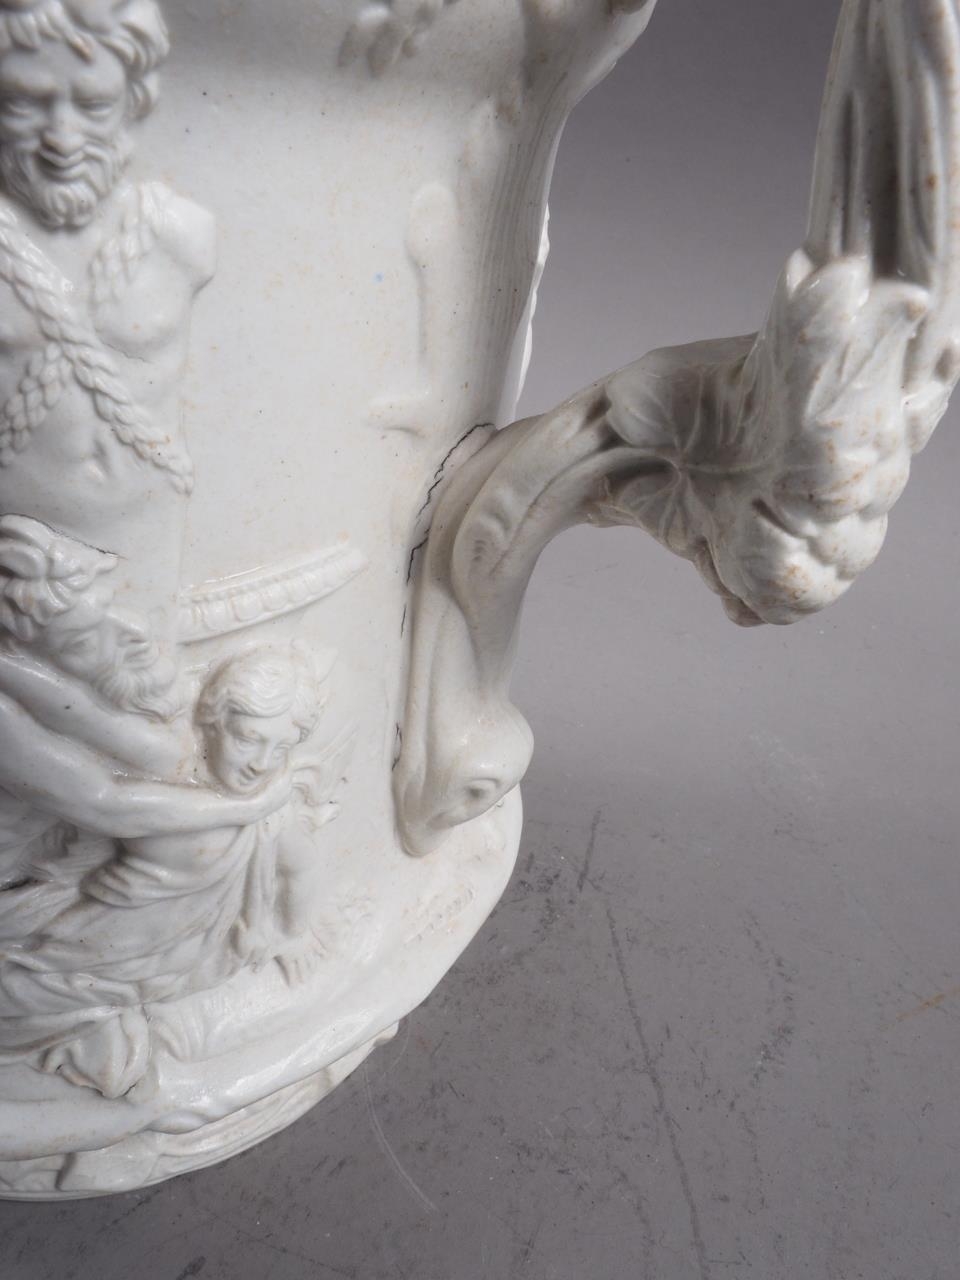 A Charles Meigh 19th century relief moulded jug with Bacchus and Silenus decoration, 10 1/4" high, a - Image 3 of 5